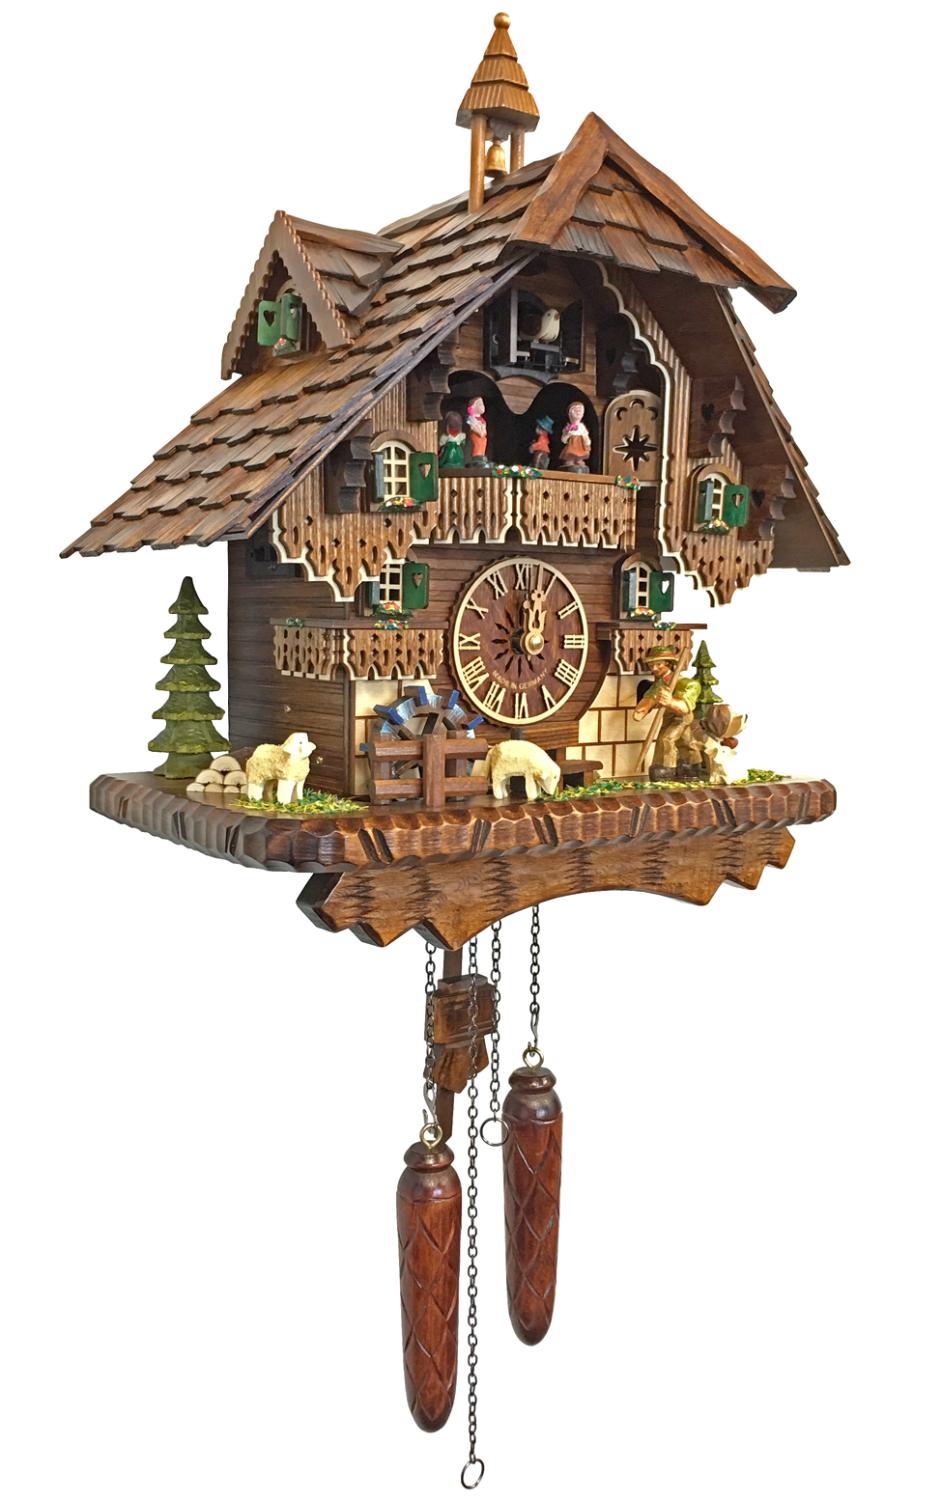 Engstler Battery-operated Cuckoo Clock - Full Size                                                                                                                                                      